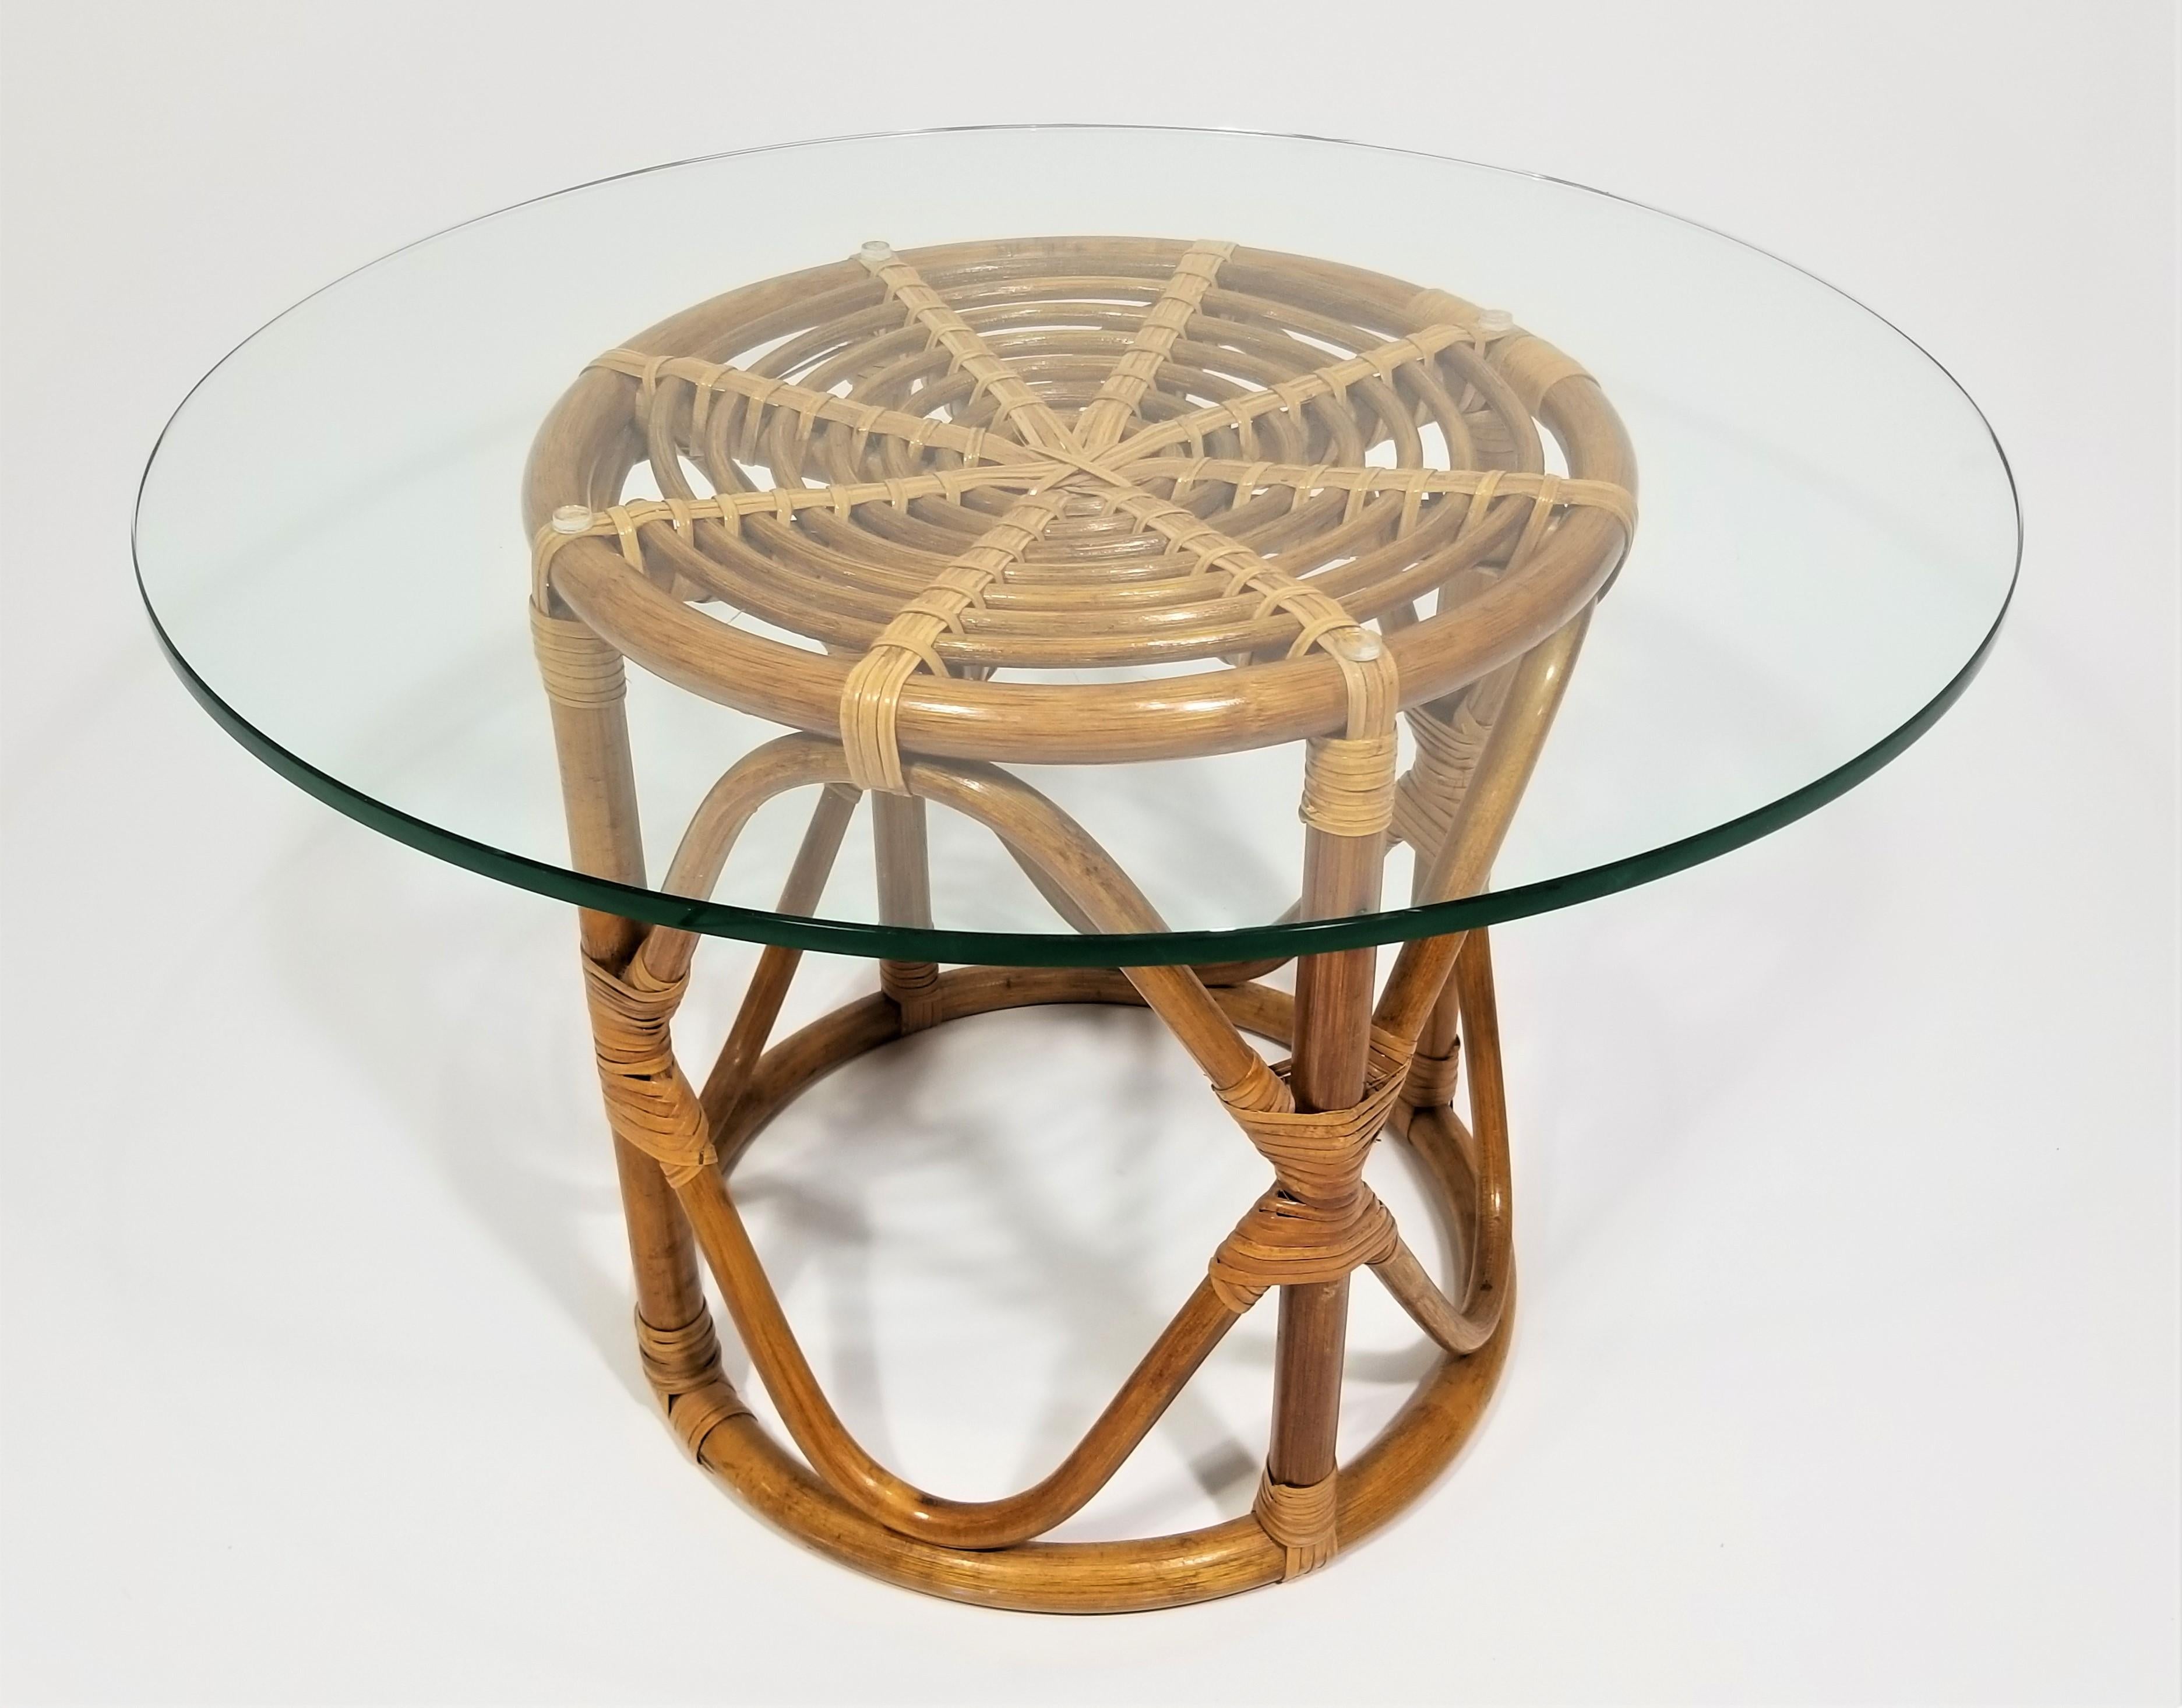 Mid century 1970s rattan and glass top table. End table, side table or could also be used as a coffee or cocktail table. 

Complimentary free delivery can be arranged for this item in NYC and surrounding areas. 

Wicker base dimensions 
Height: